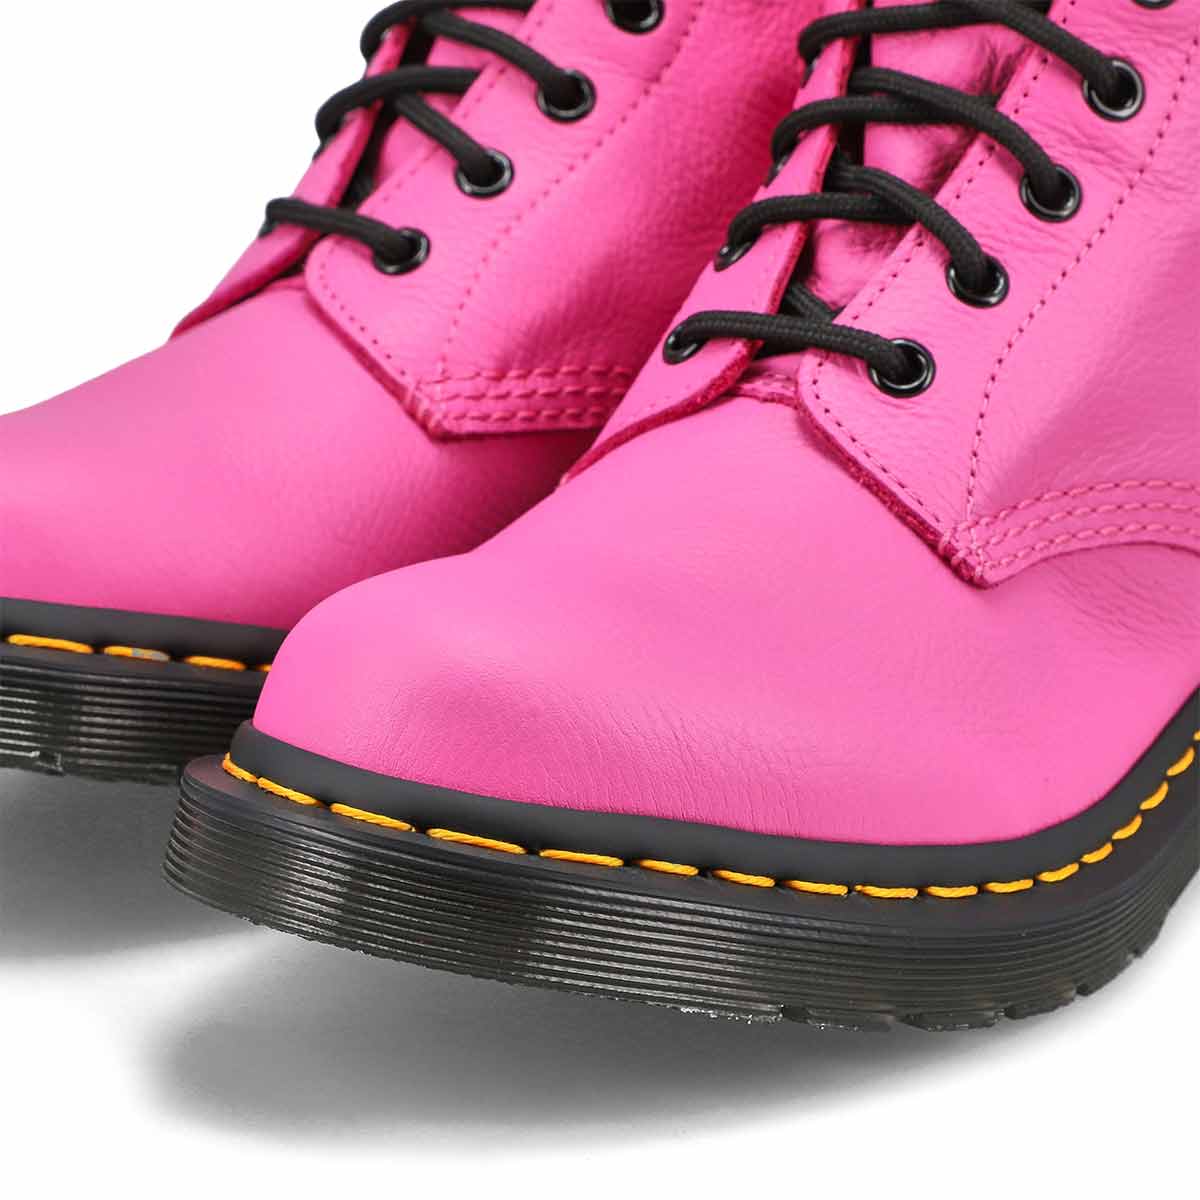 Dr Martens Women's Core Pascal 8-Eye Leather | SoftMoc.com